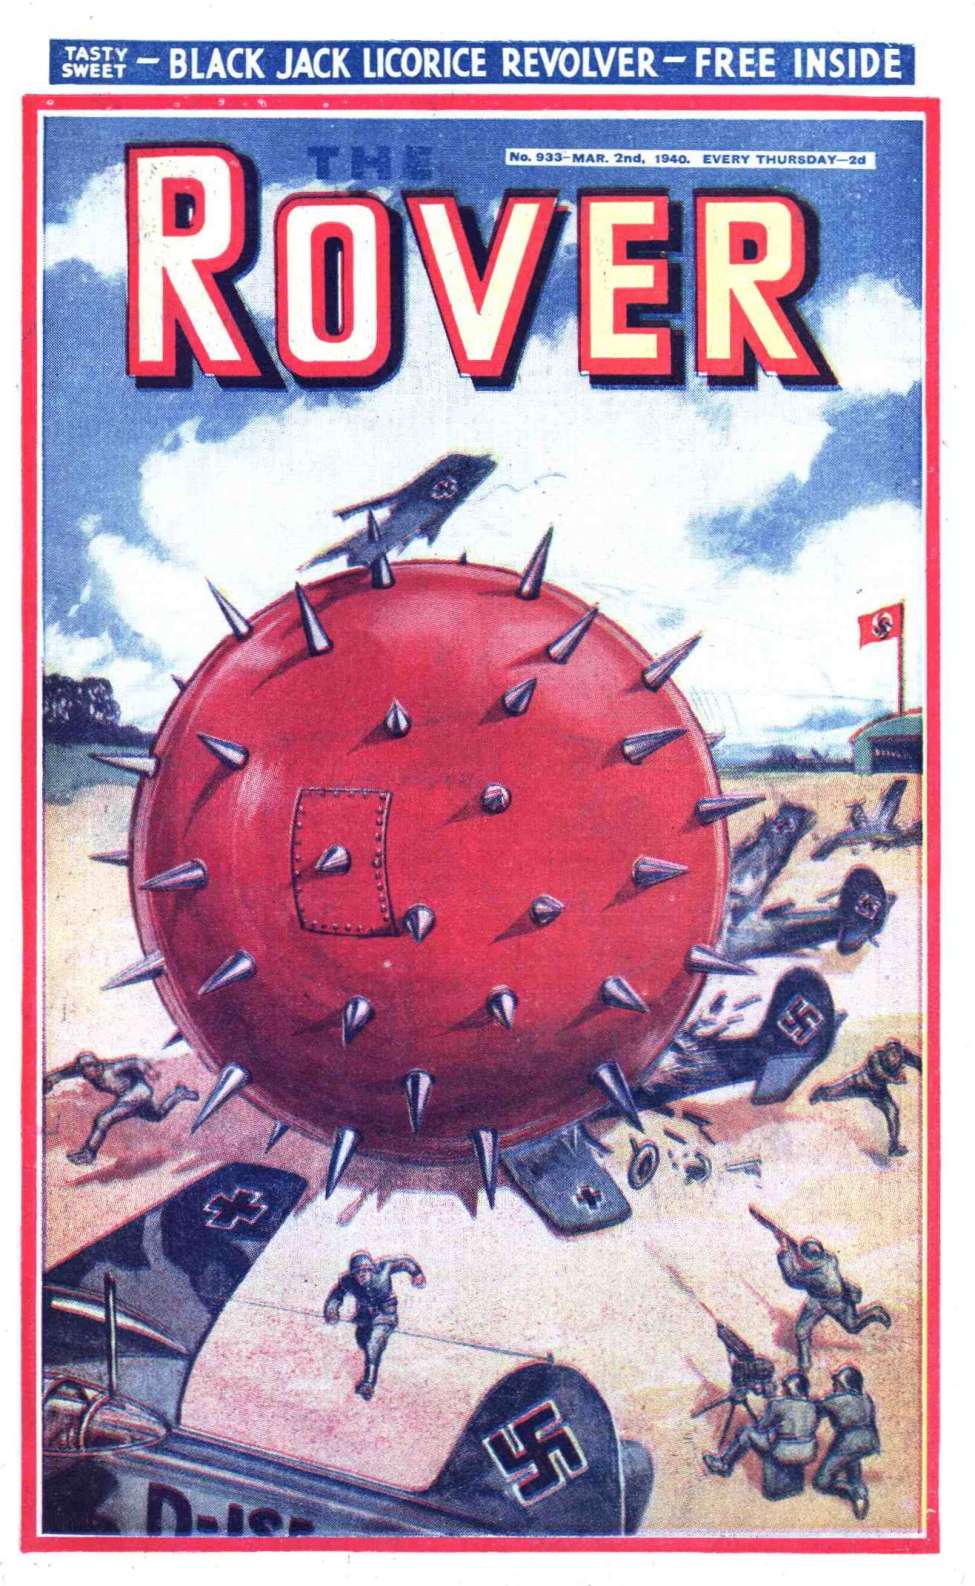 Book Cover For The Rover 933